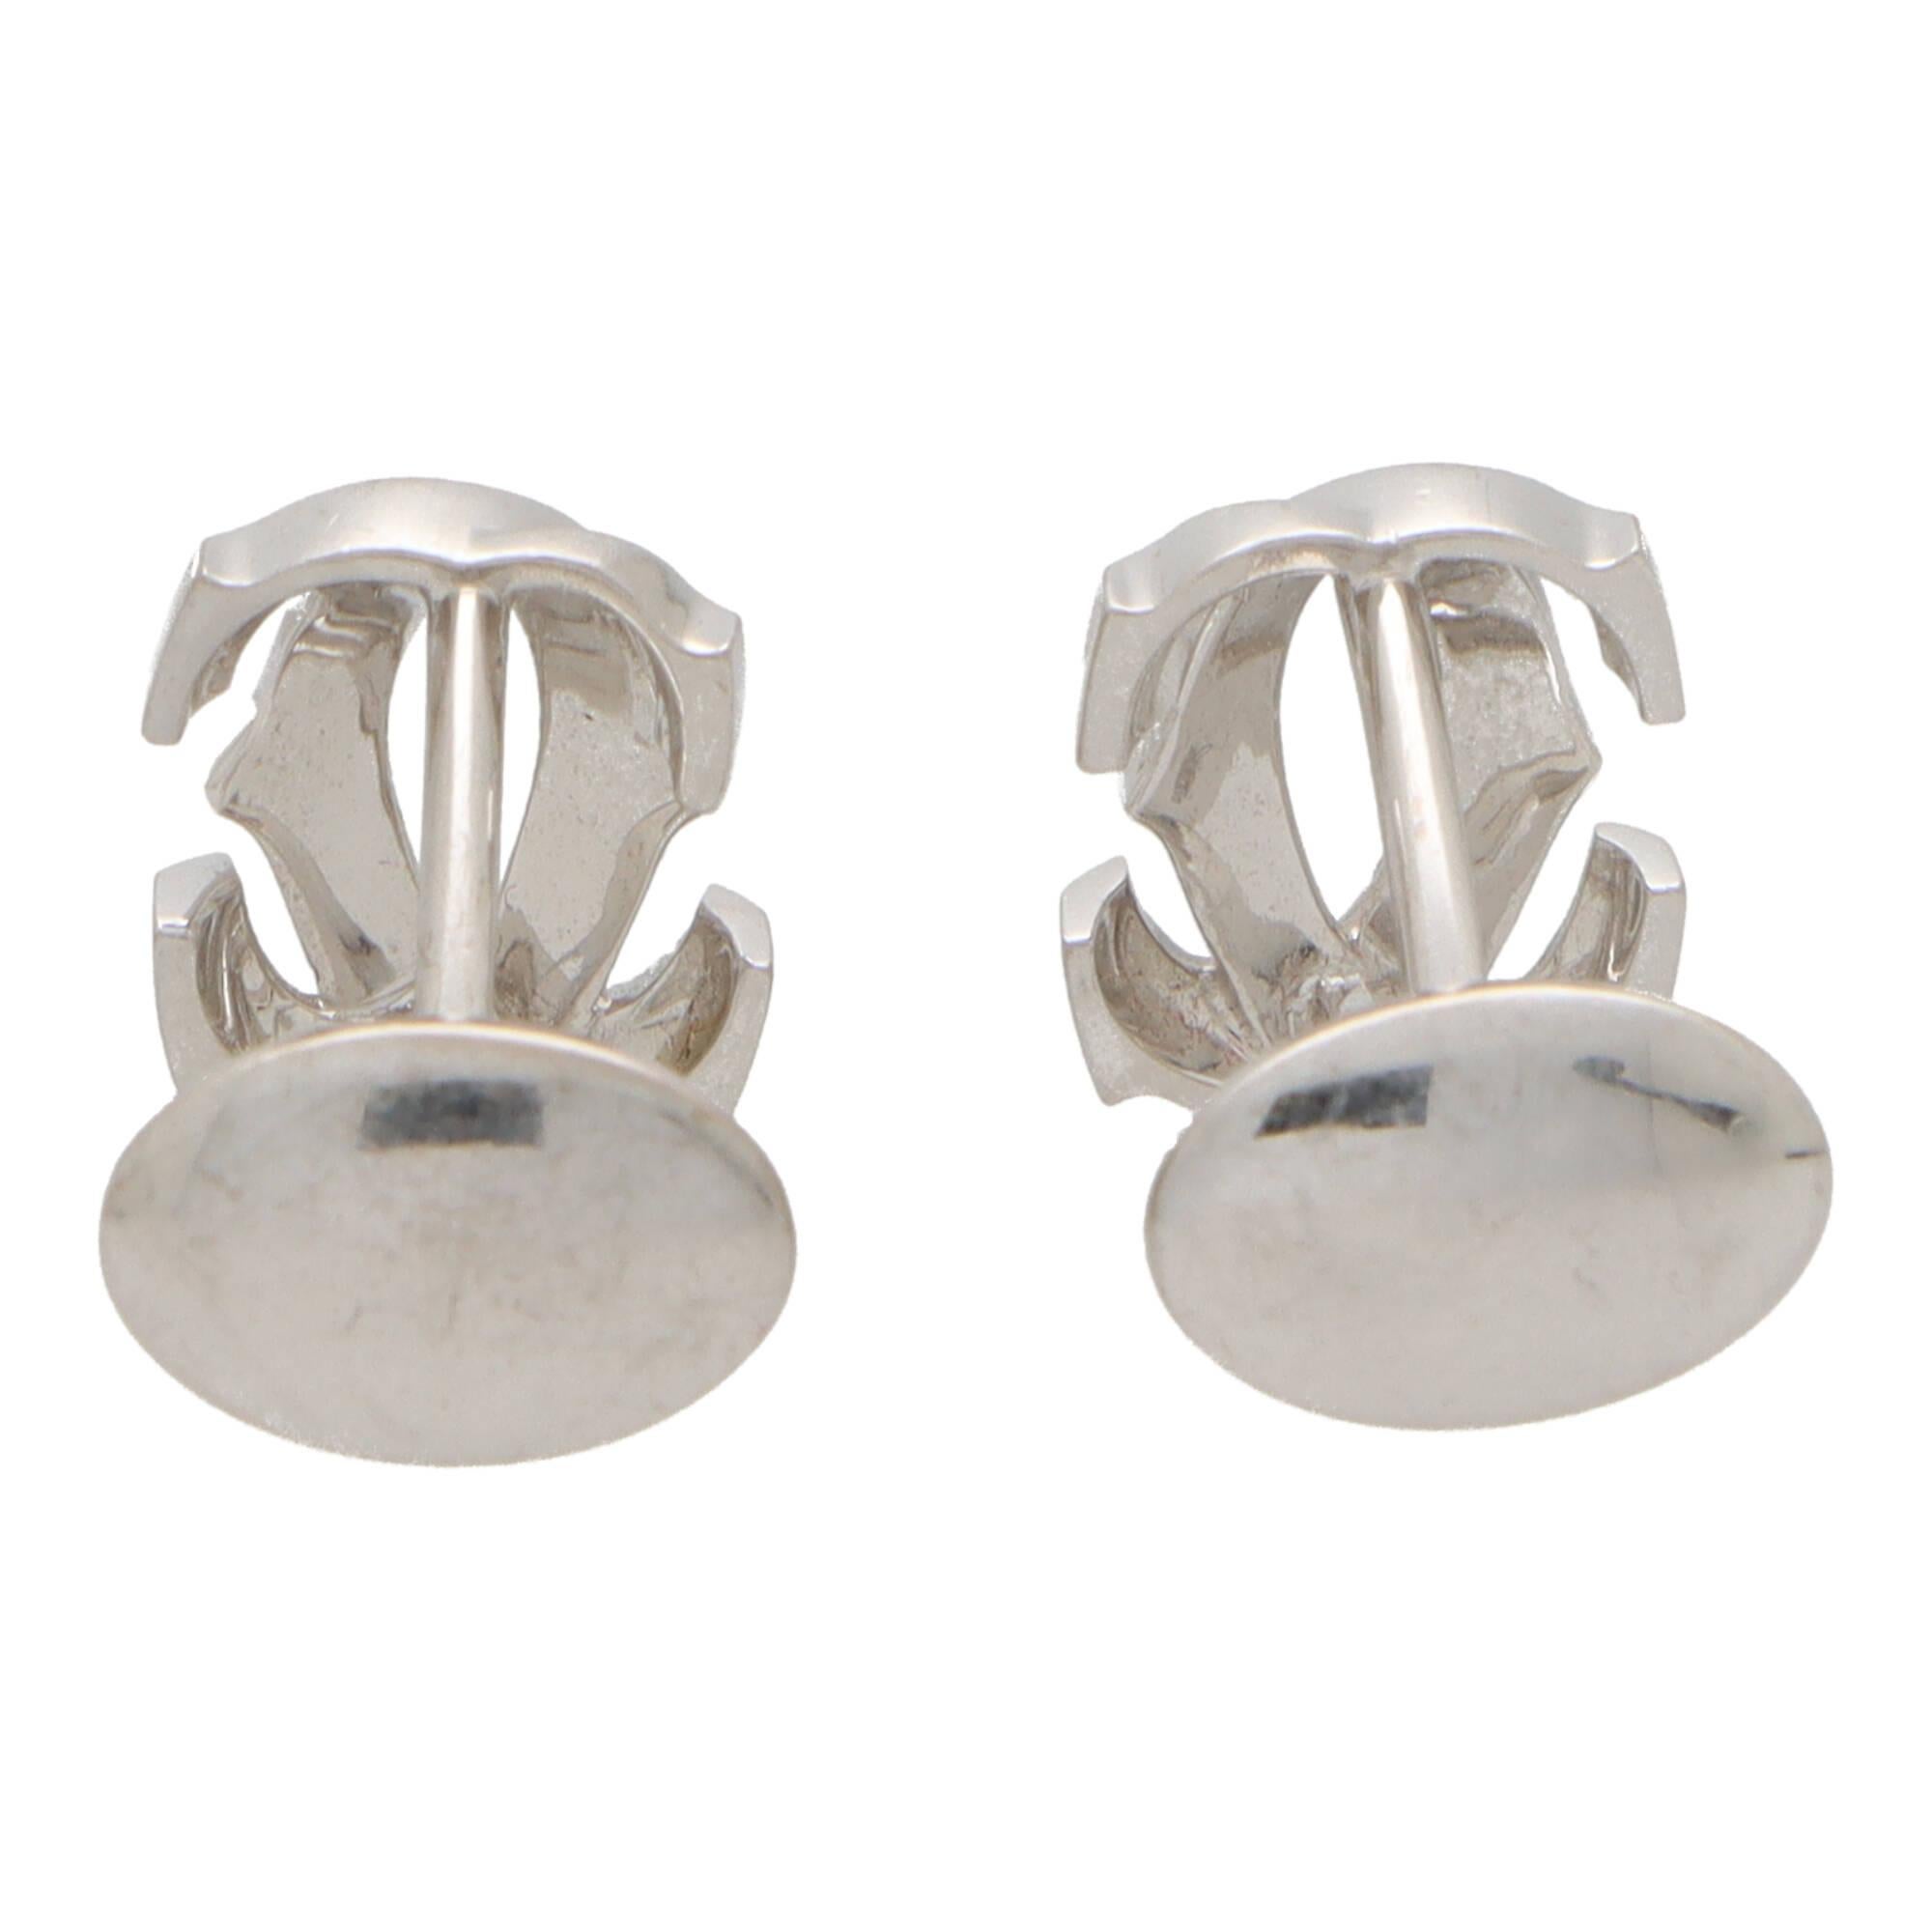 Vintage Cartier 'Penelope' Logo Swivel Back Cufflinks in 18k White Gold In Excellent Condition For Sale In London, GB